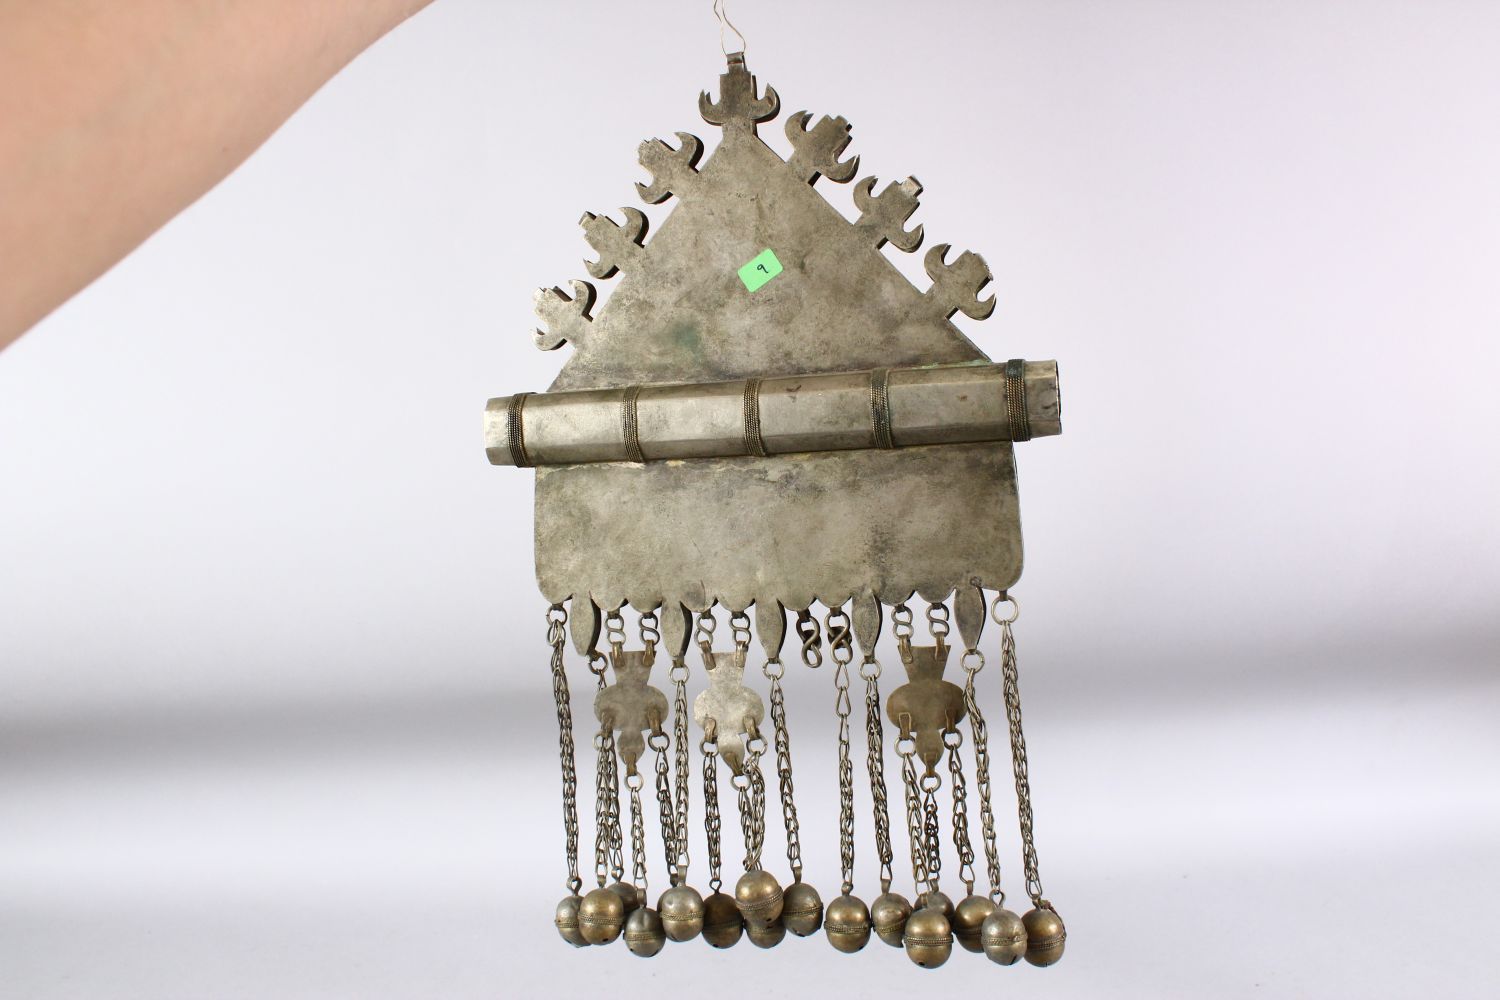 AN ISLAMIC CEREMONIAL NECKLACE with large metal pendant, the pendant 22cm x 21.5cm. - Image 2 of 2